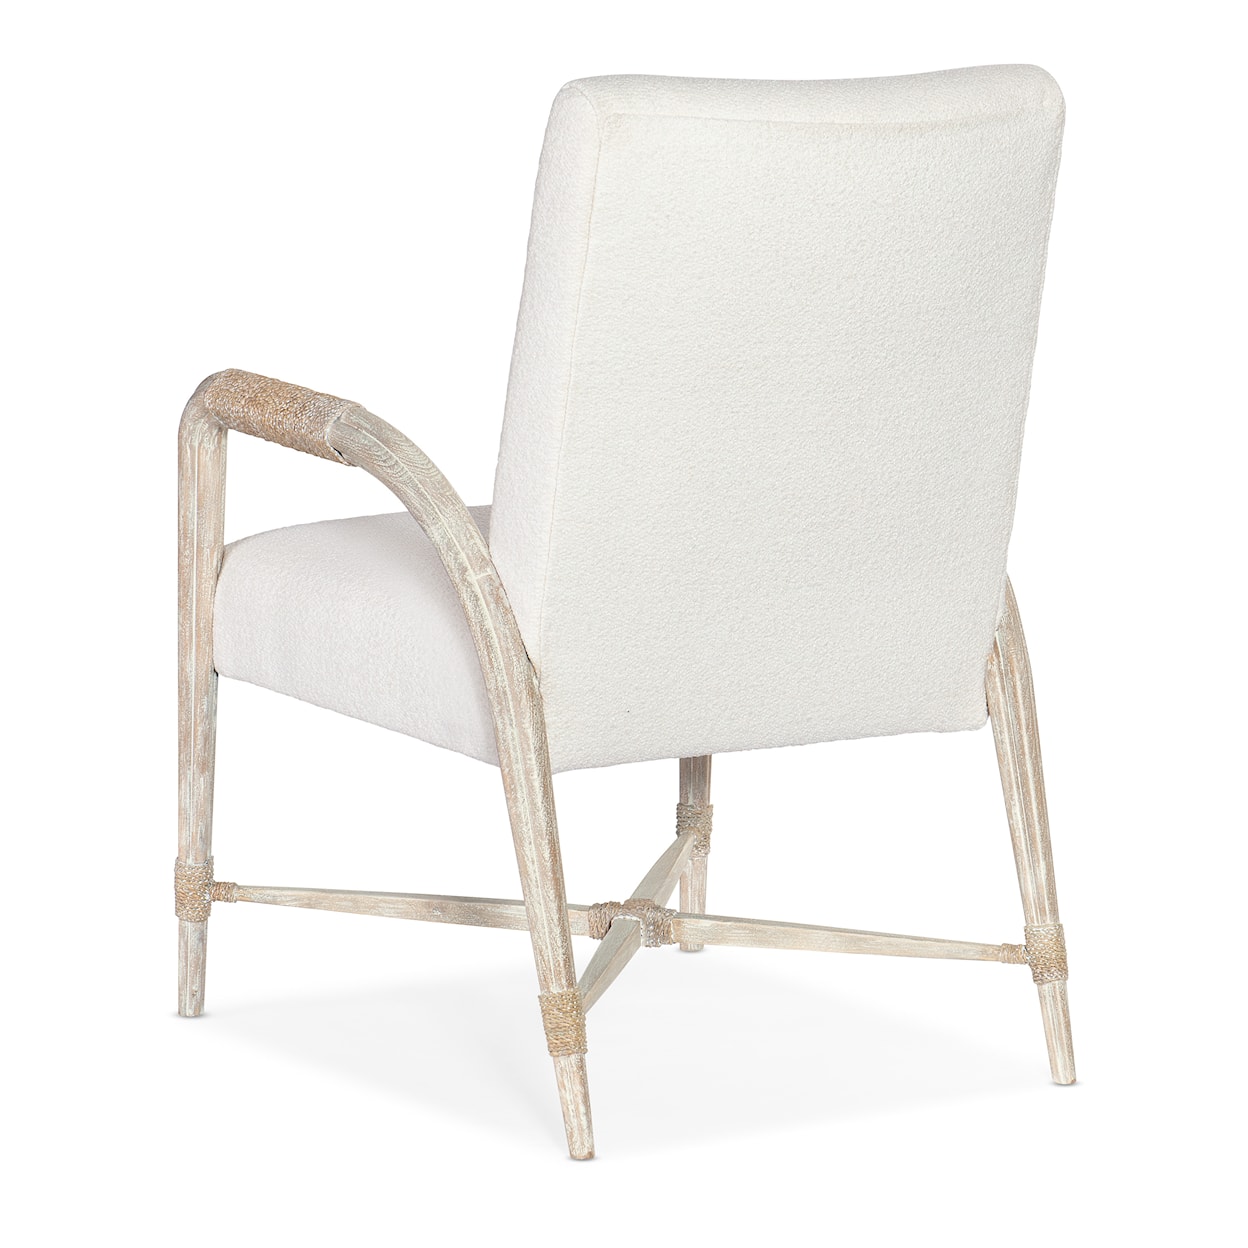 Hooker Furniture Serenity Upholstered Arm Chair